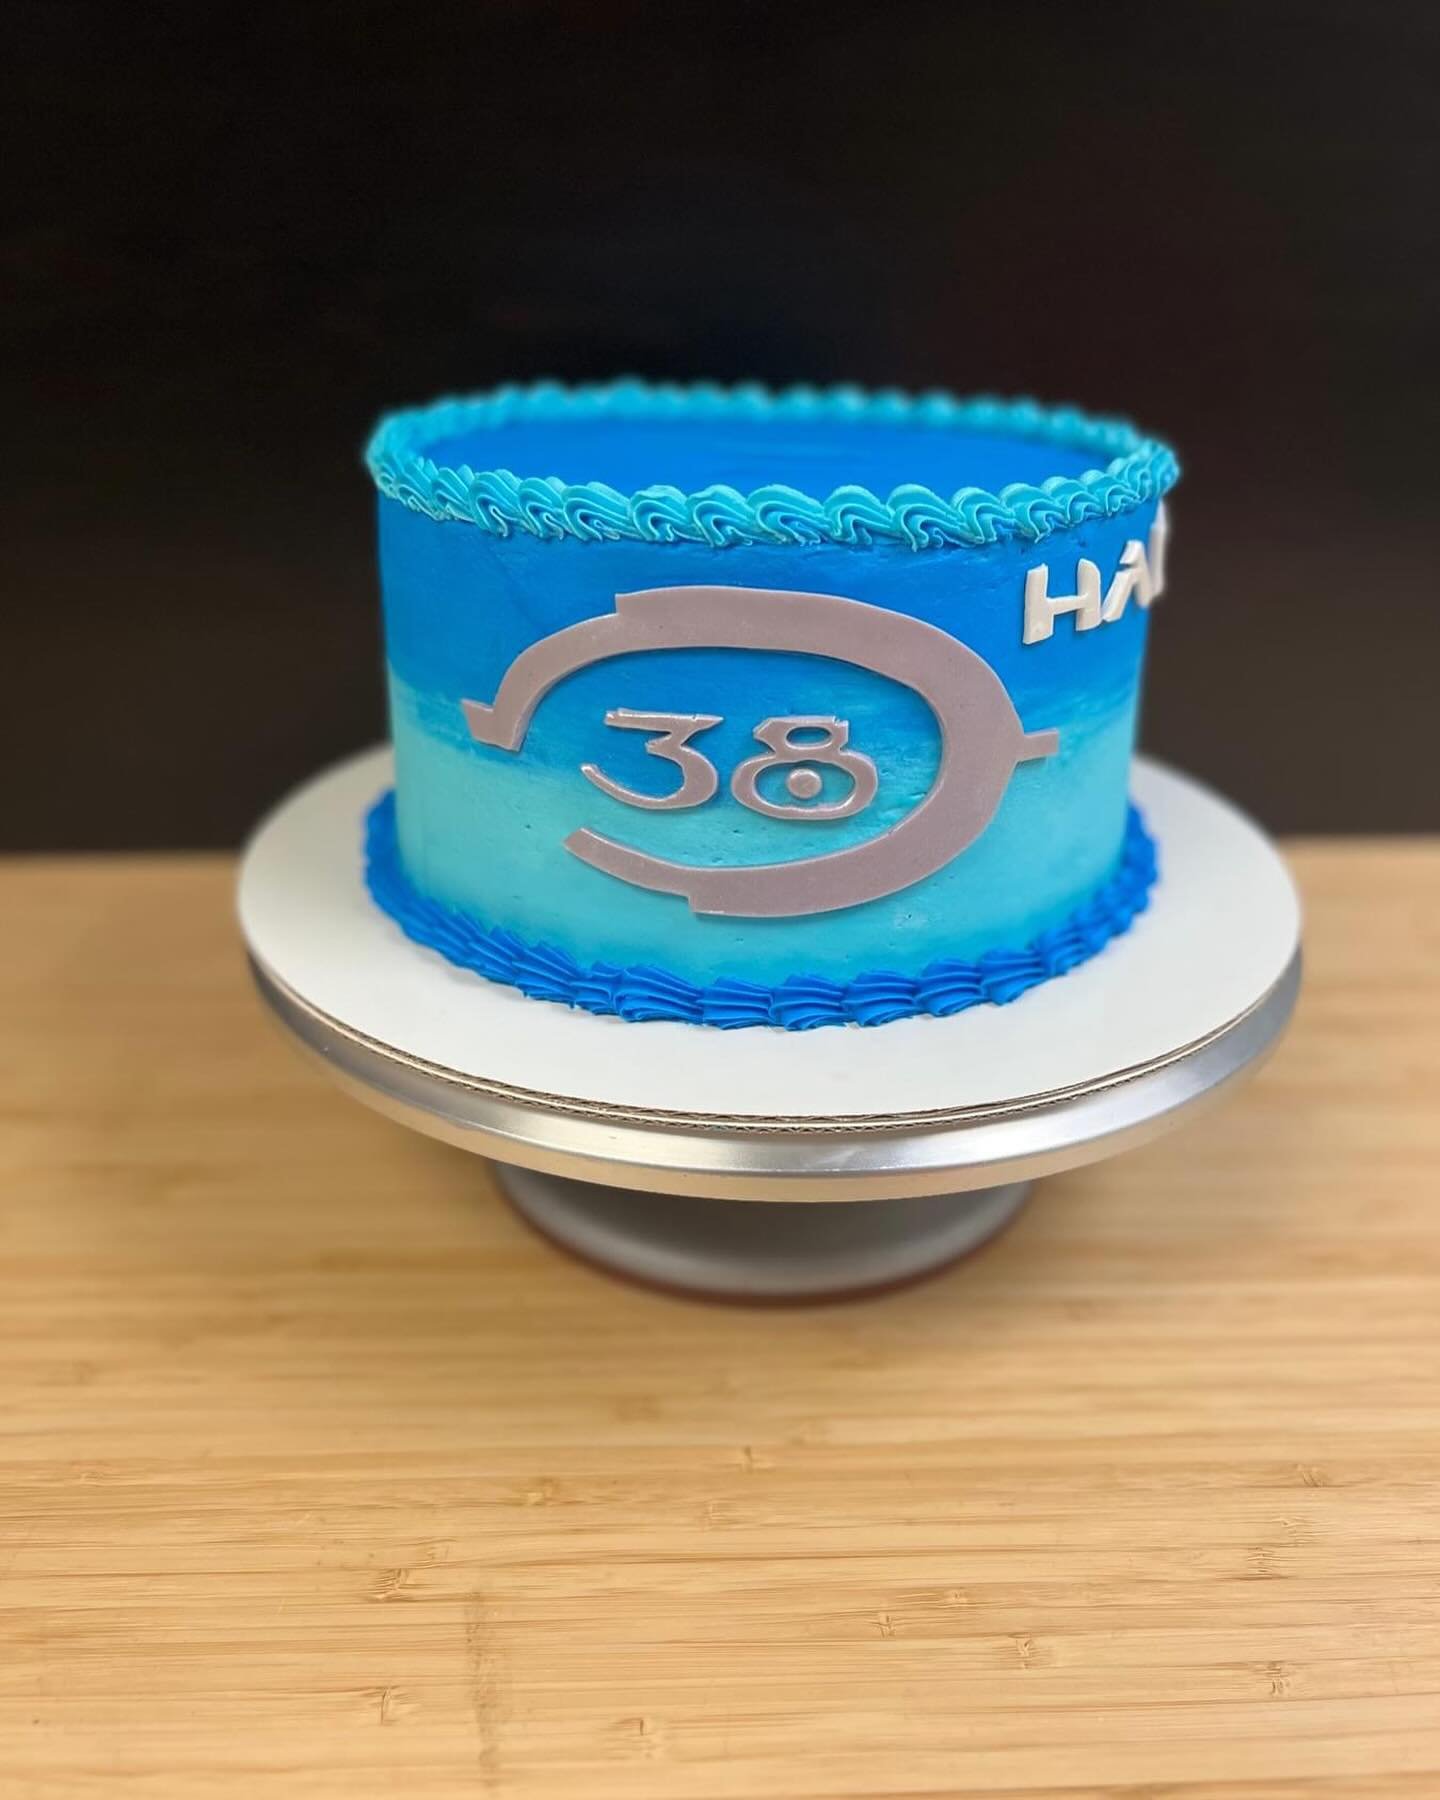 Boy did that topper juuuuuuuuuust fit, huh?! 🤣  This one goes out to the Halo fans out there. We are big gamers in this house so we always love when a game theme cake comes our way. Special thanks to this loyal customer for always getting her family